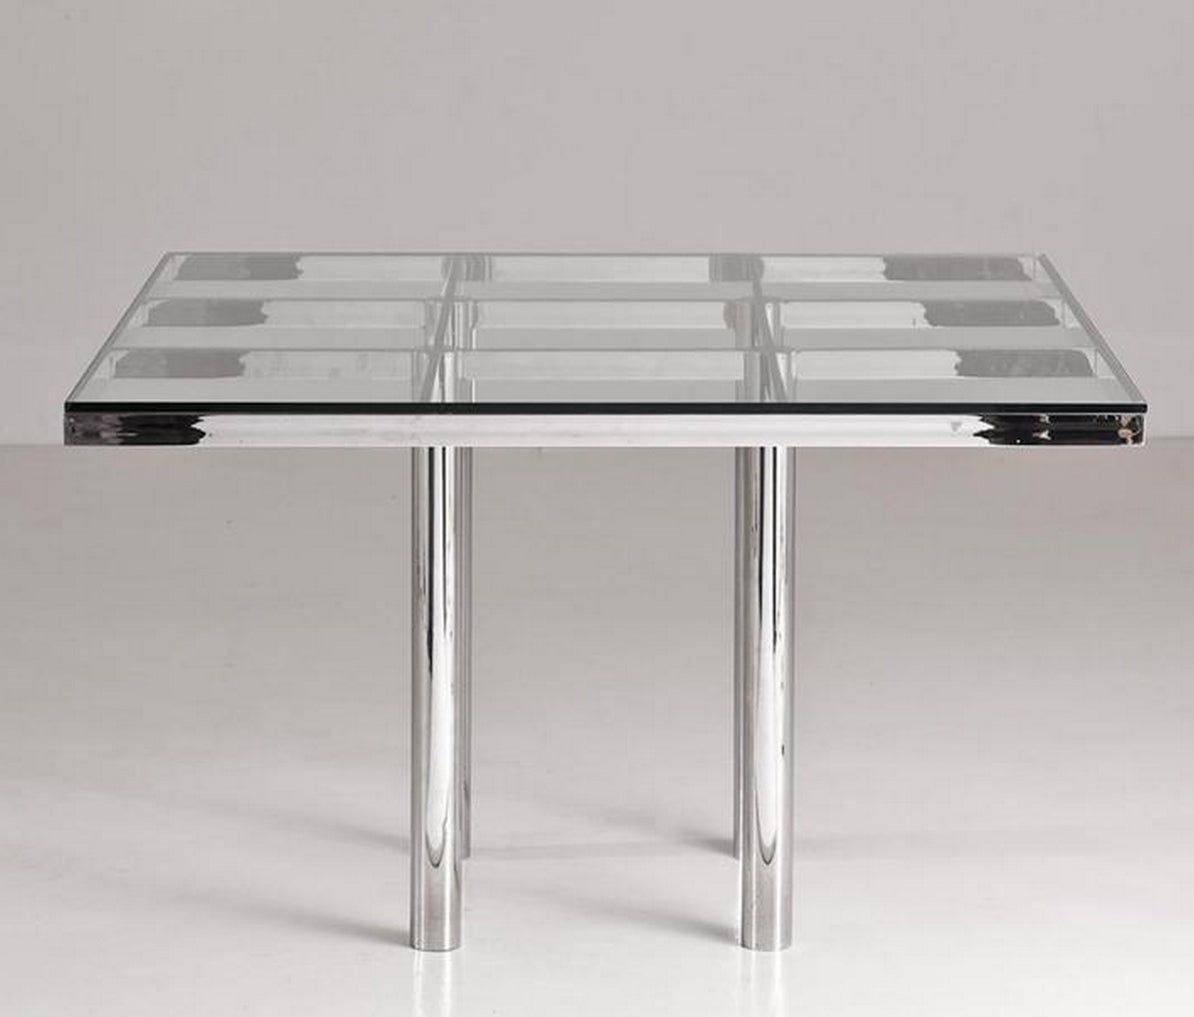 andre table